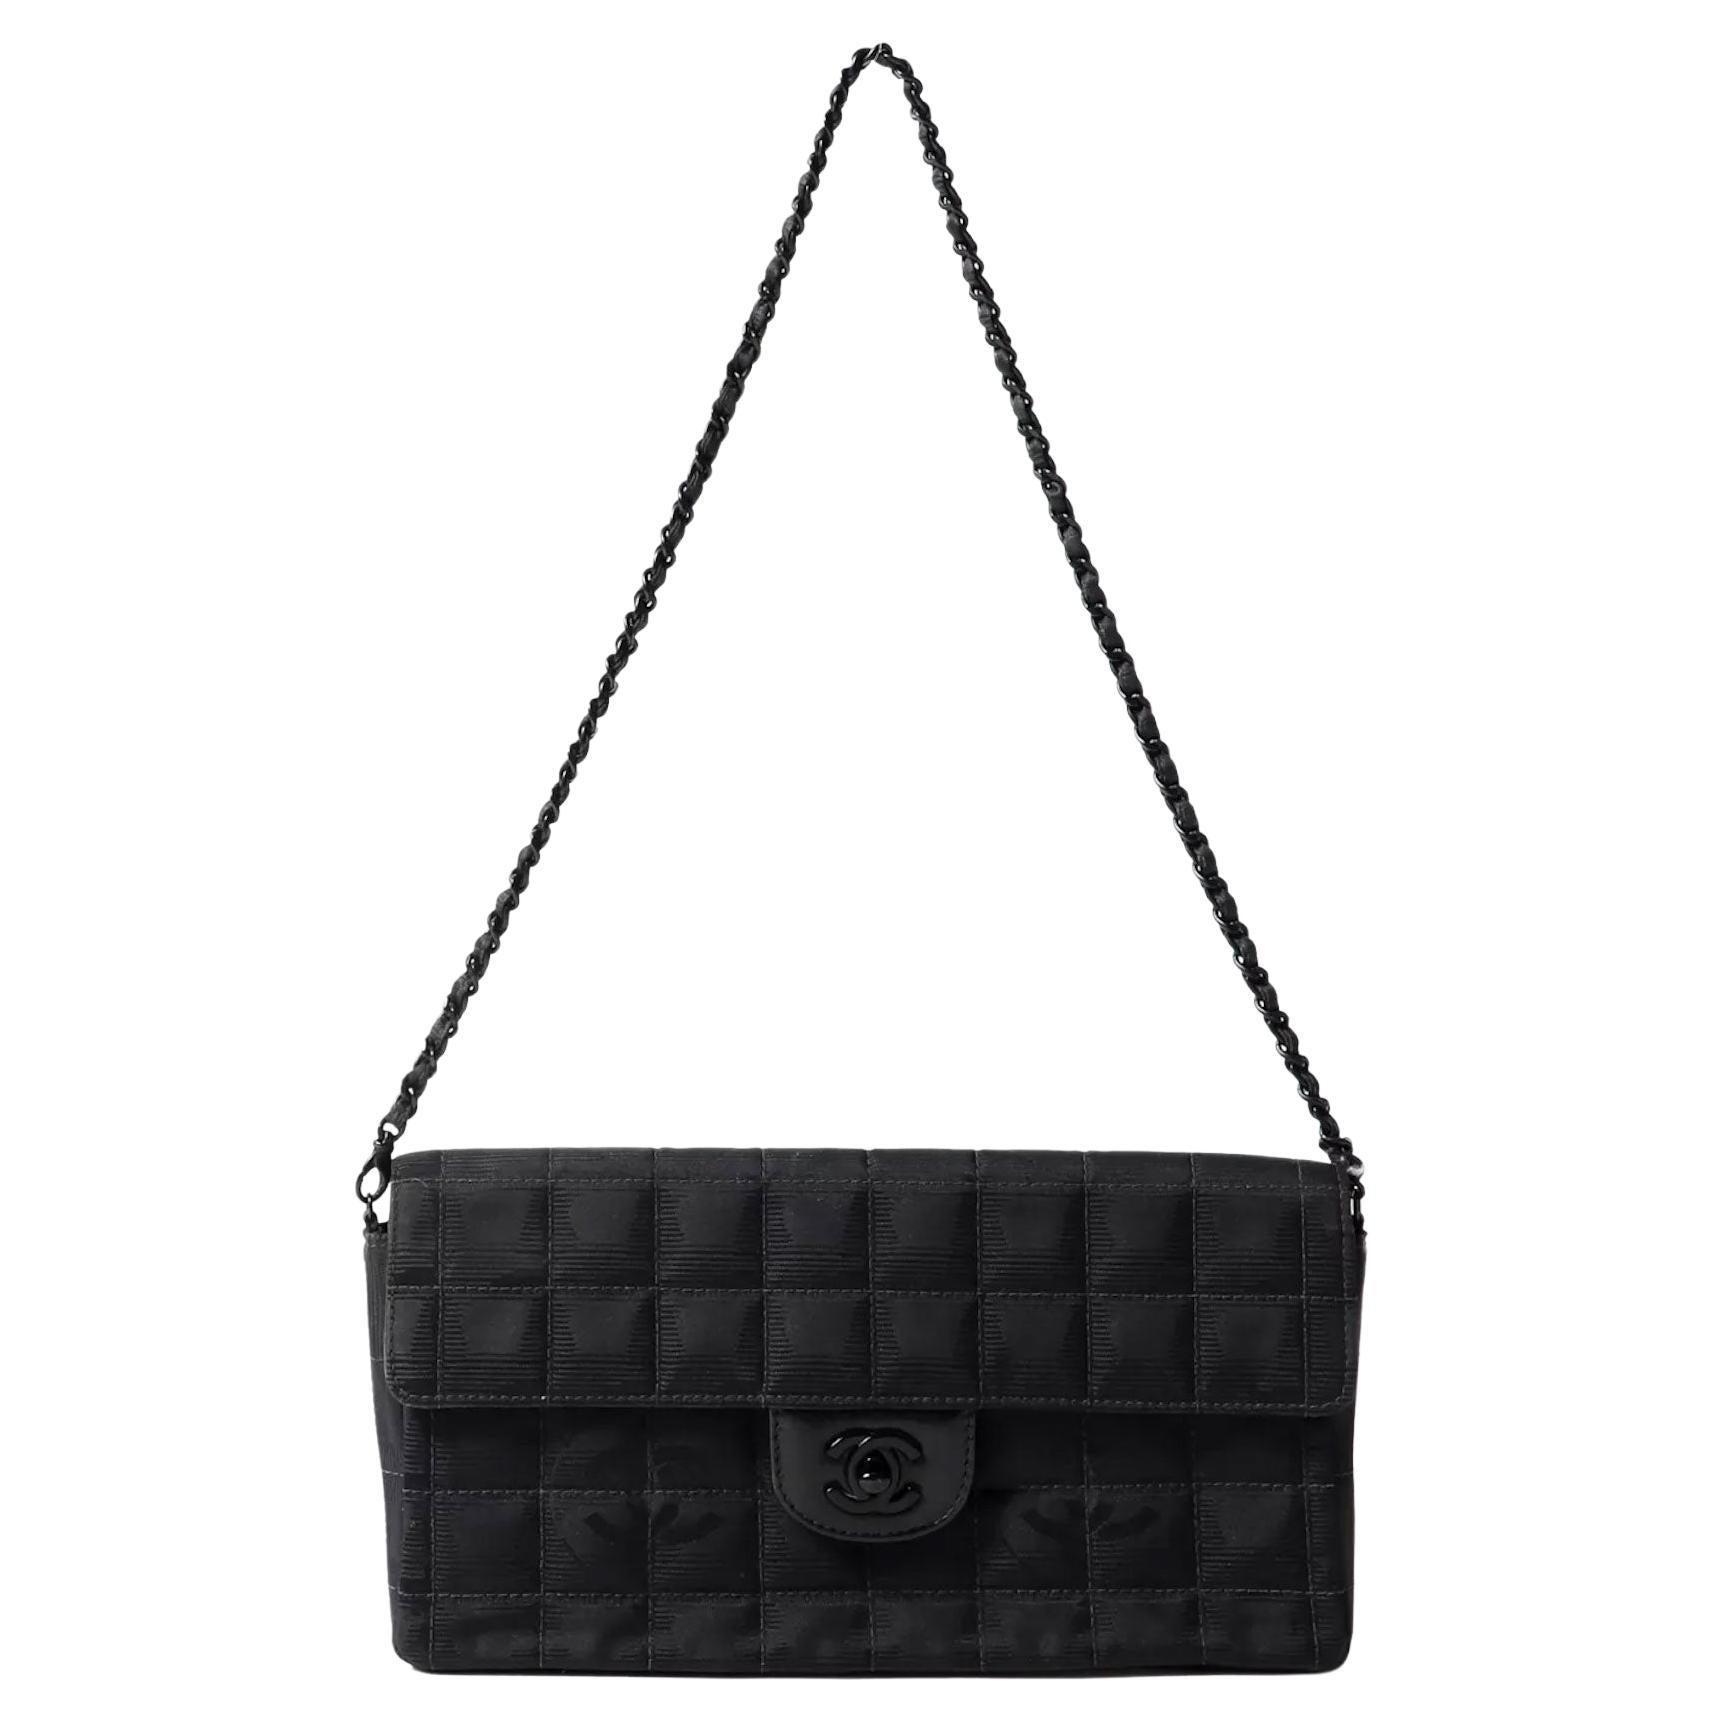 Chanel Vintage So Black Long Medium Shoulder Bag

Year 2002 {Vintage 22 Years}

Black nylon canvas with a flap top 
CC turn-lock closure 
Leather entwined chain shoulder strap 
Black metal hardware 
Carry it as a clutch or shoulder bag 
Interior has